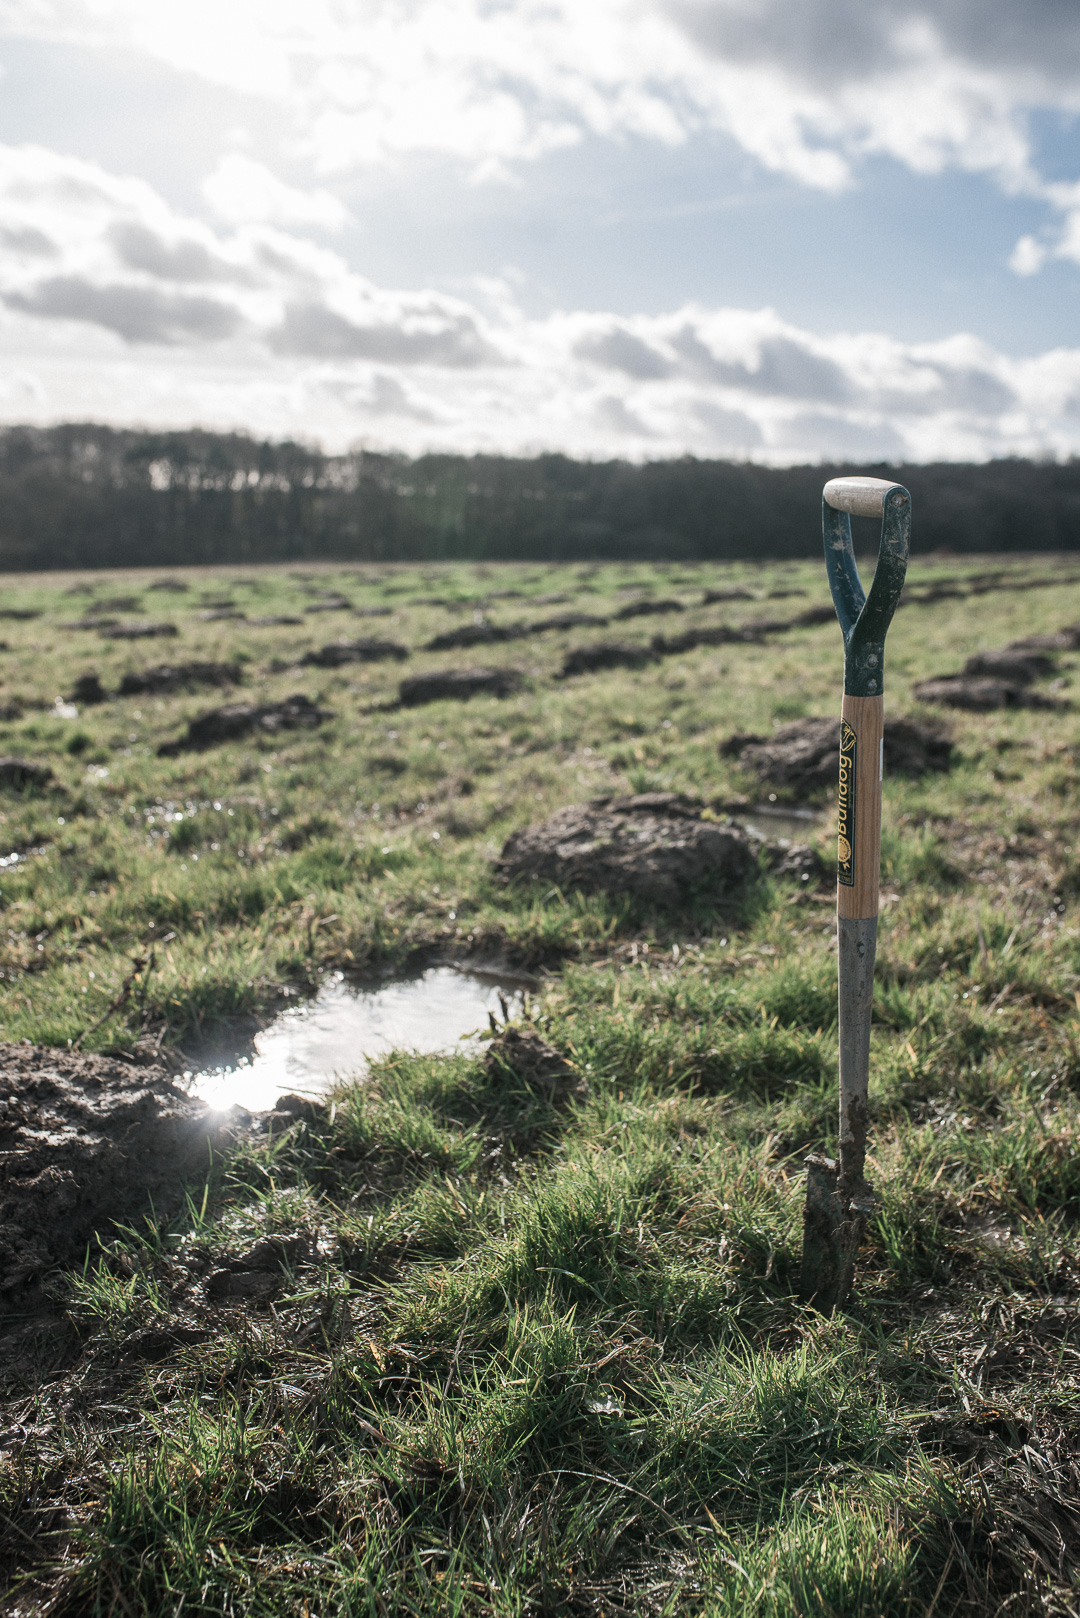 Joules Tree Planting - A spade in the muddy ground